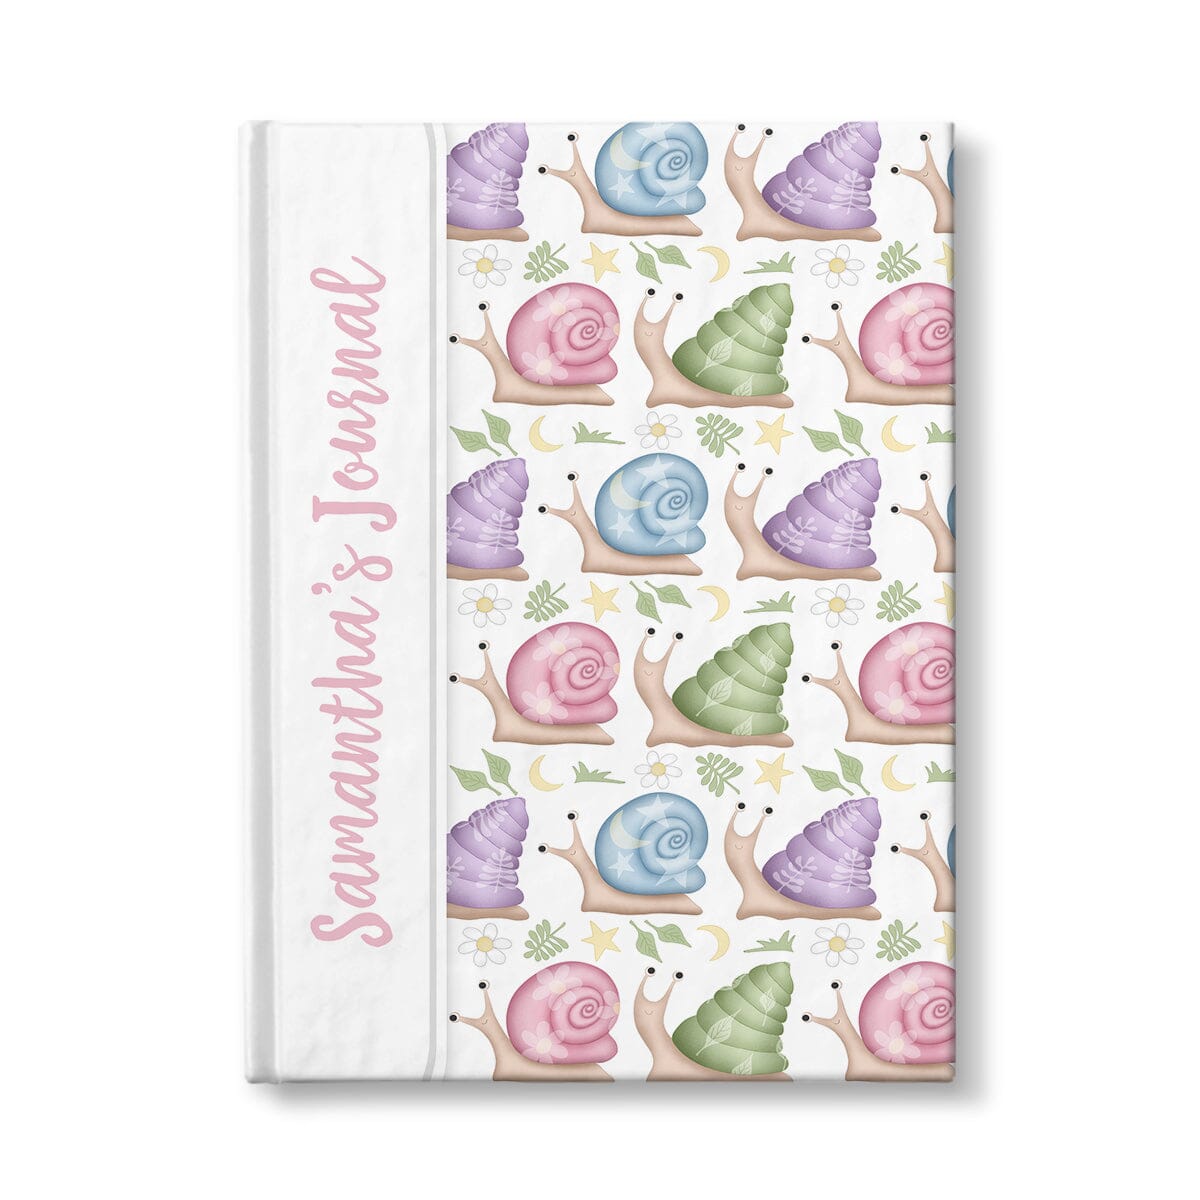 Personalized Cute Snails Journal with pink personalization at Artistically Invited.